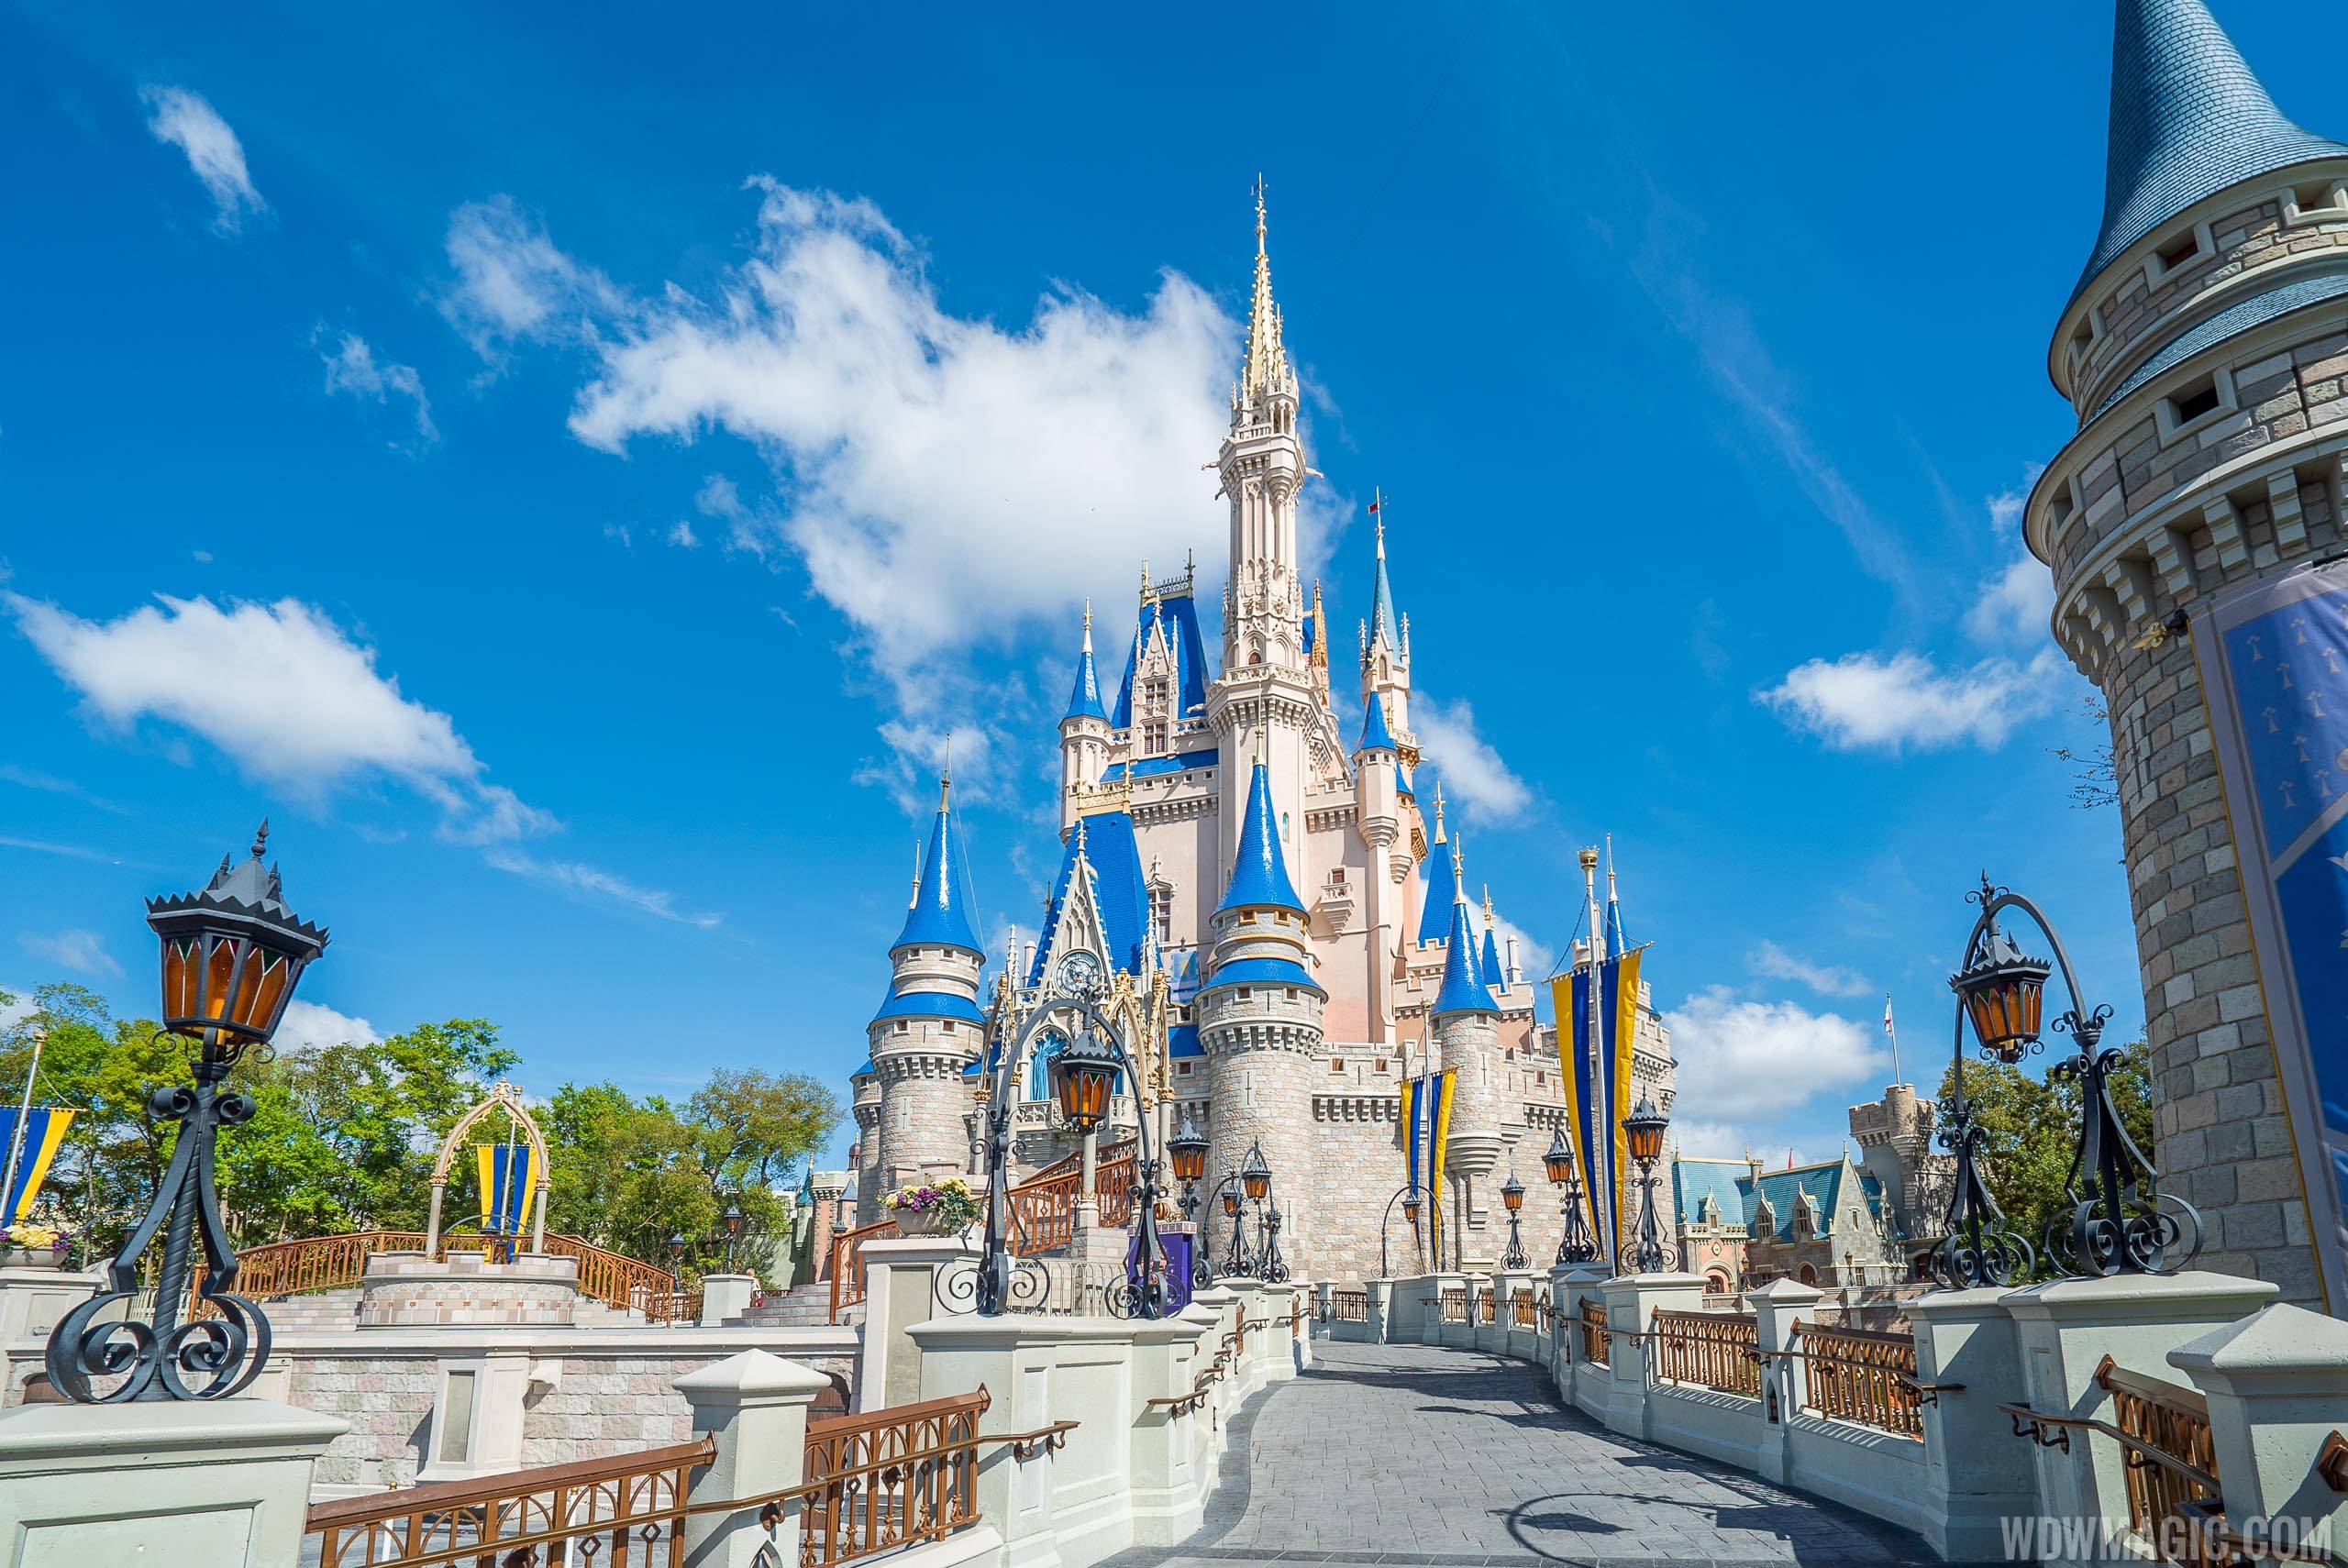 Walt Disney World plans to reopen its theme parks from July 11